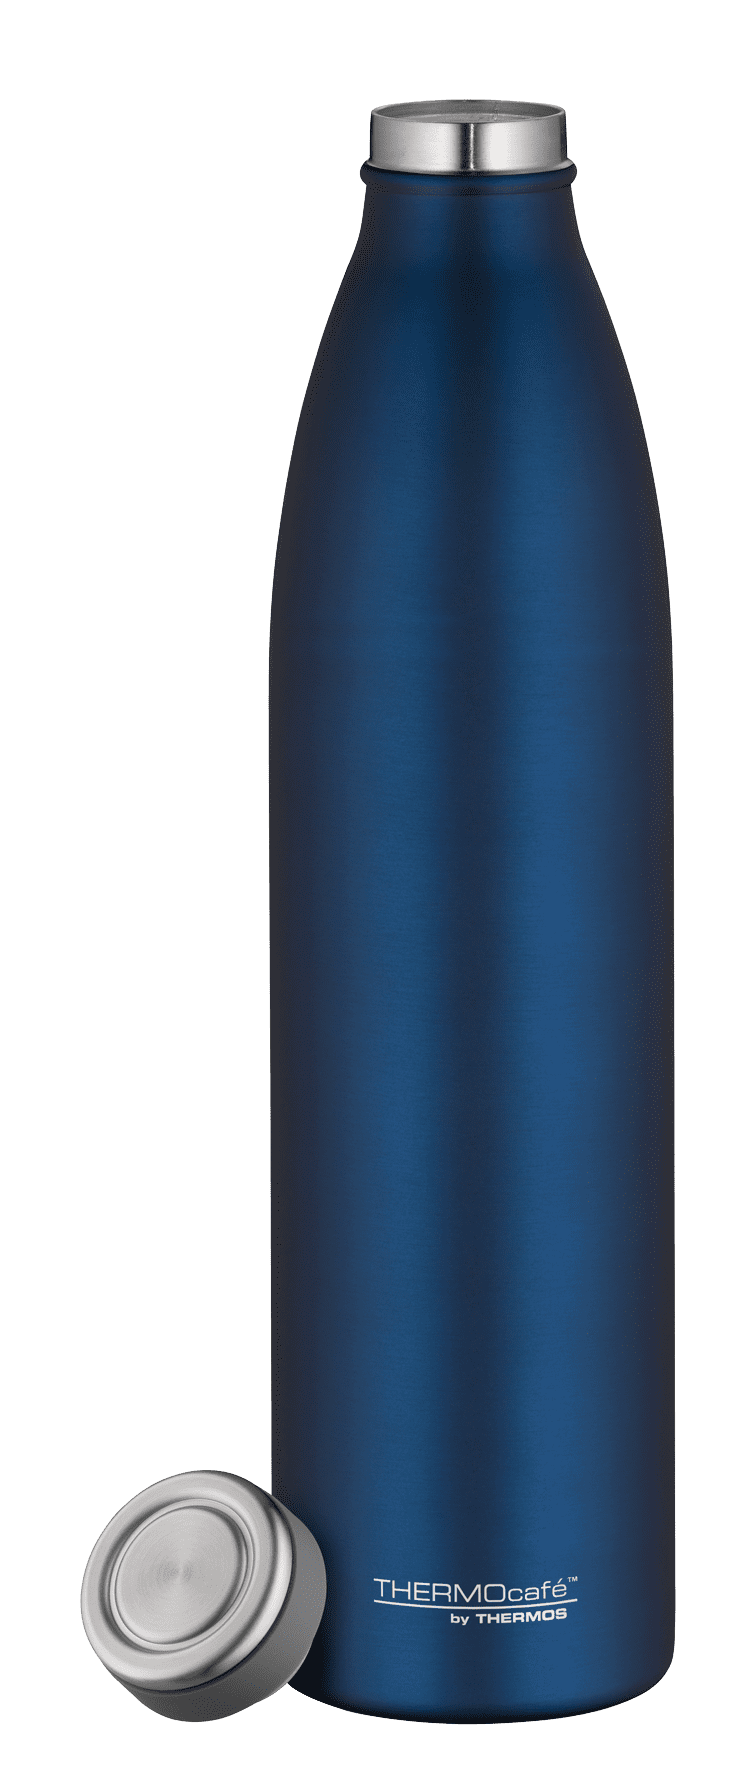 Thermos Thermocafé Isolierflasche 4067 saphire blue 1,0l,deckel